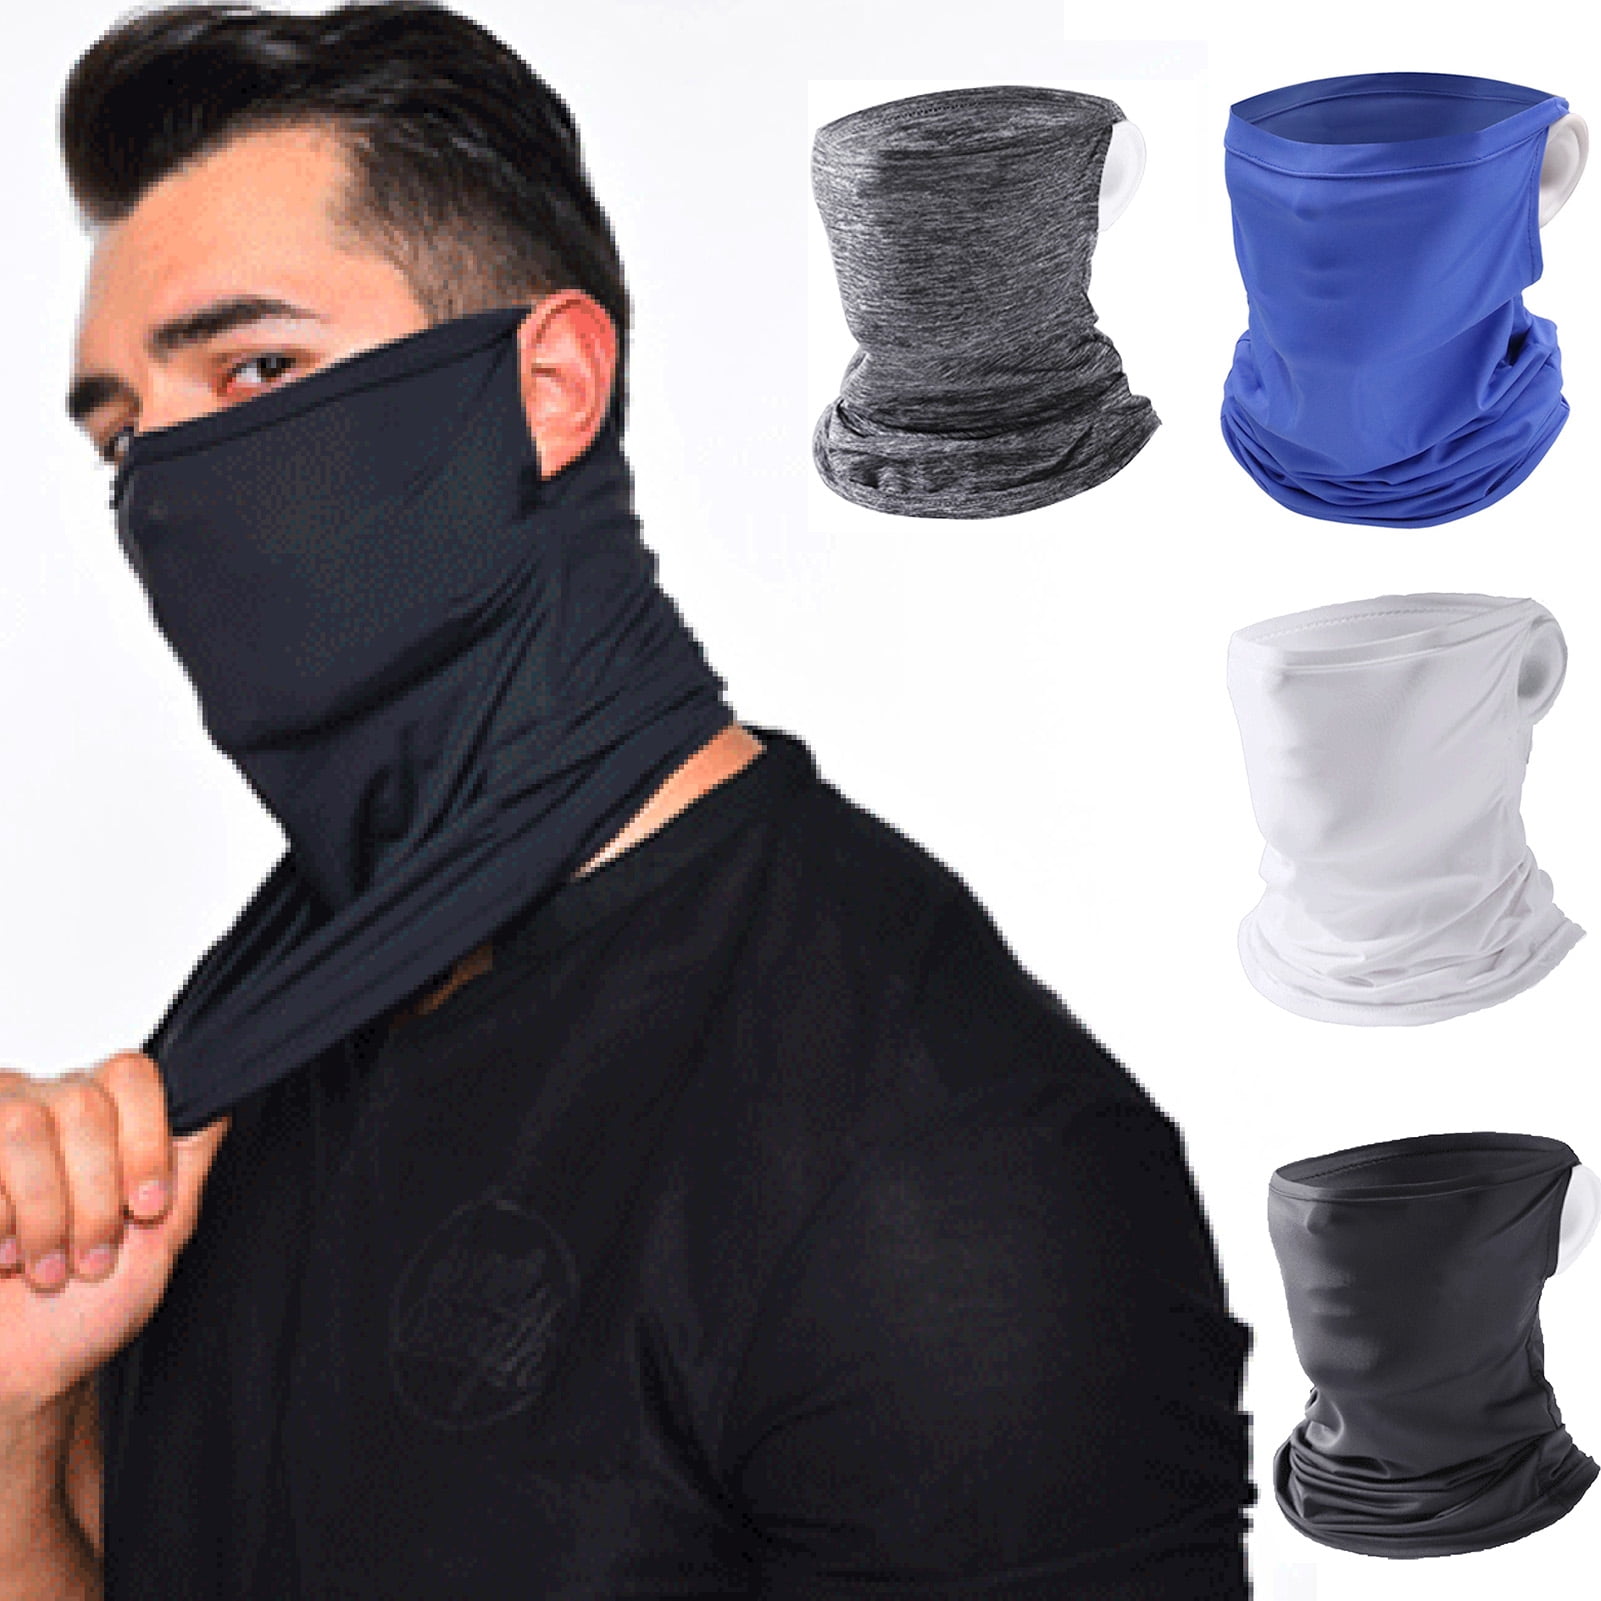 UVProtections Tube Mask Washable Face Cover Neck Gaitor Outdoor Sports Unisex#